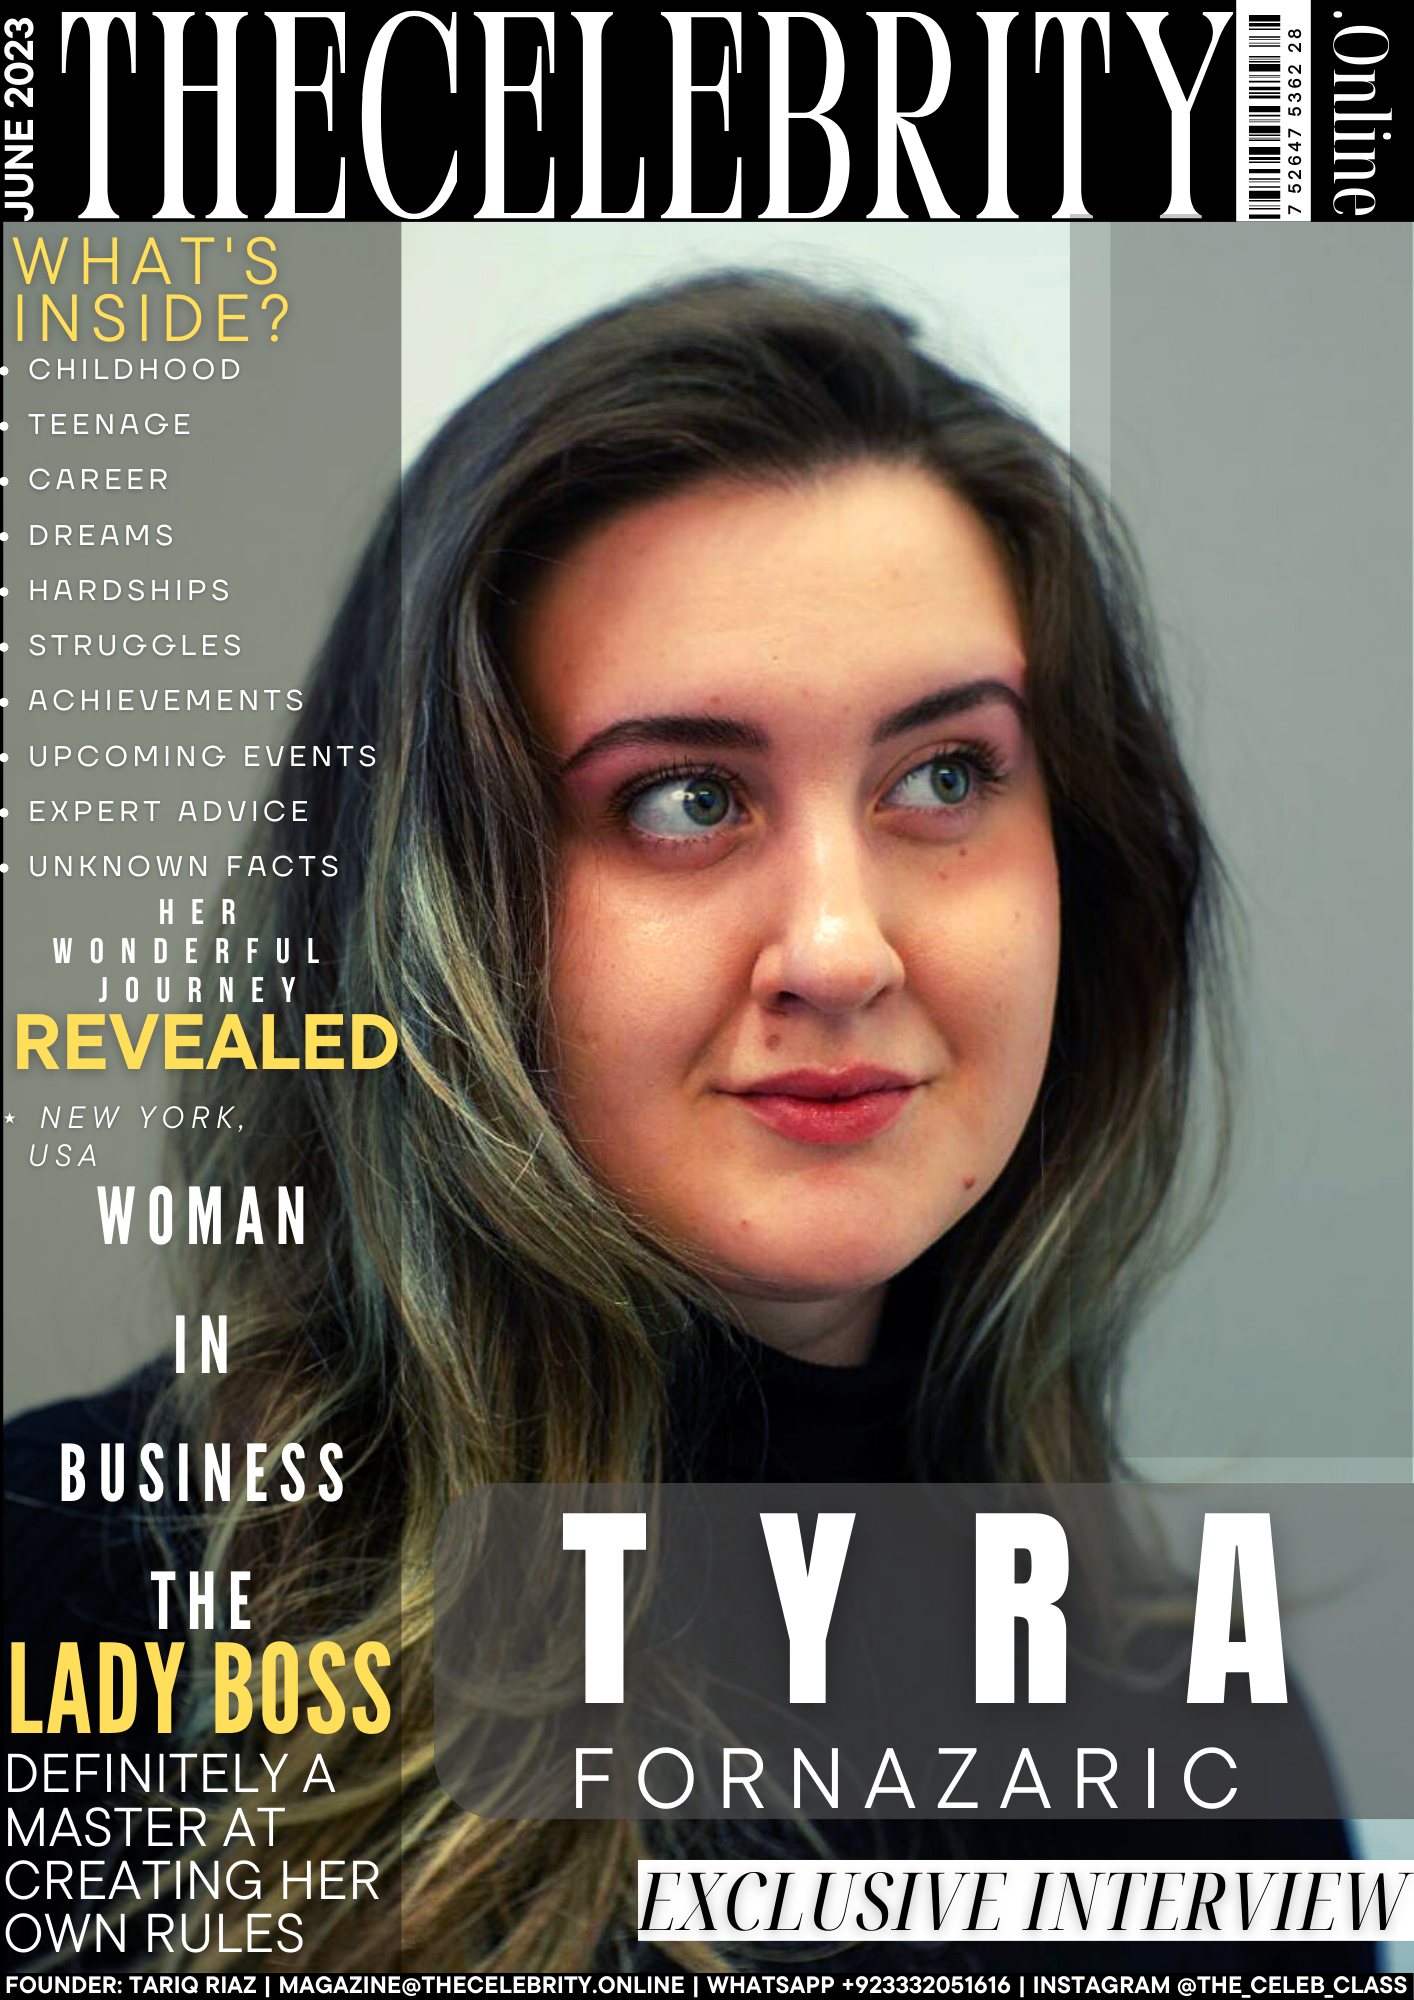 Tyra Fornazaric Exclusive Interview – ‘Listening People is the Best Way of Building Professional and Personal Relationships’